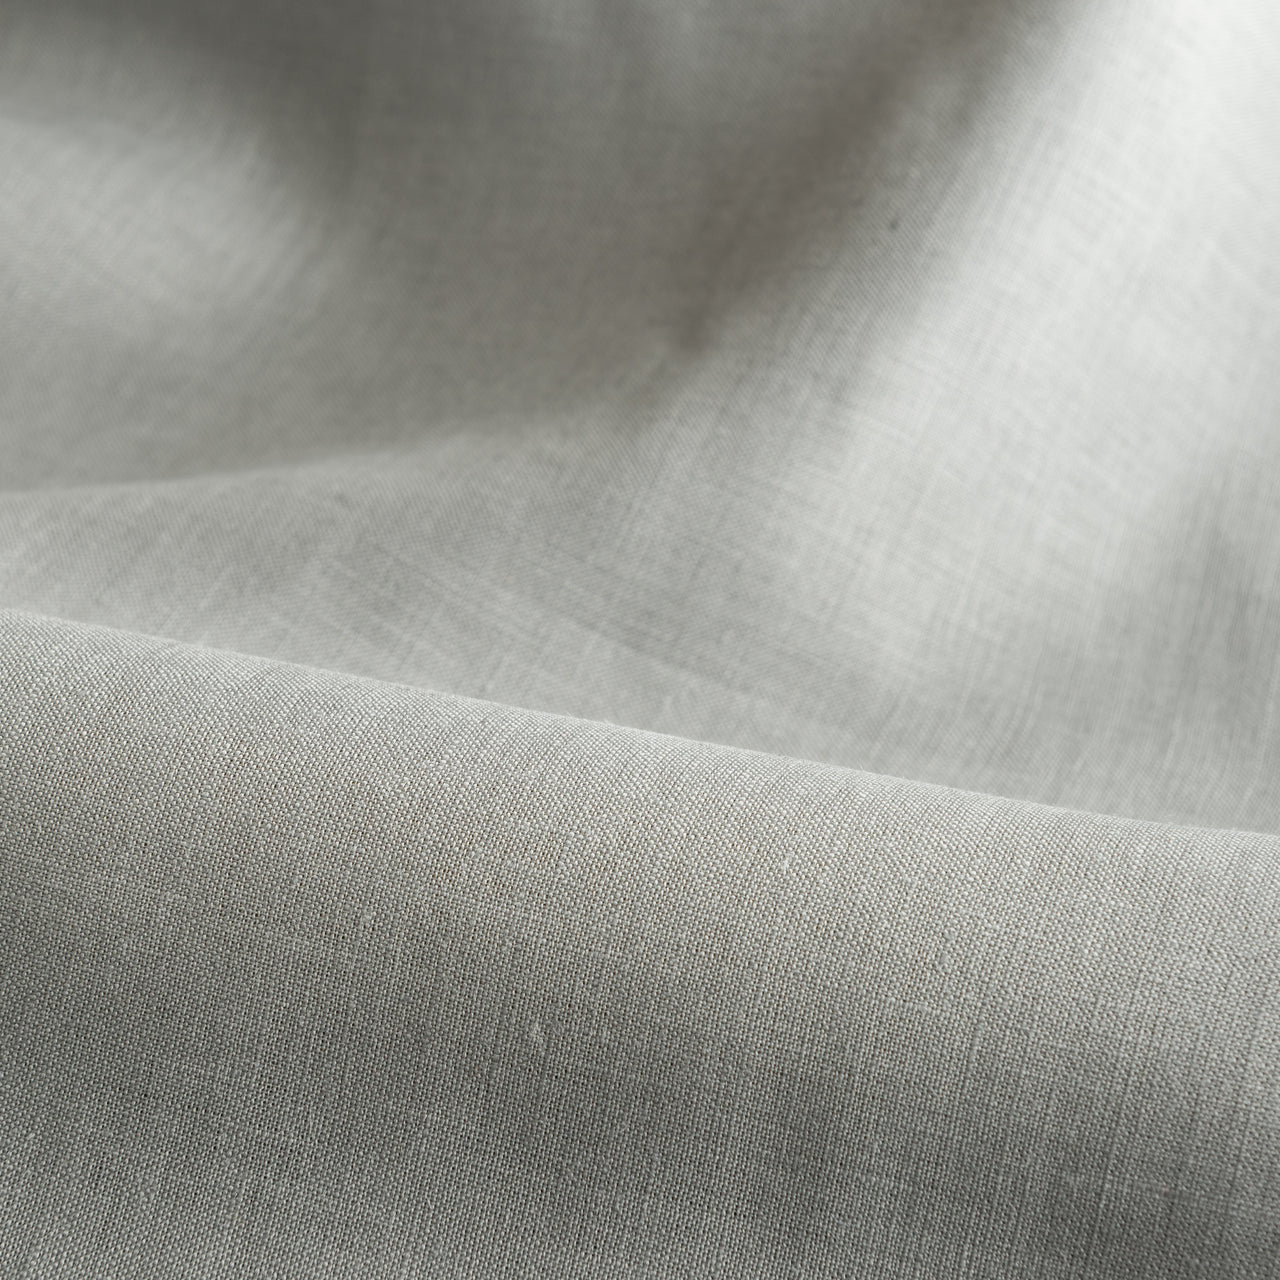 Dim Grey Fabric by the Meter - 100% French Natural - Width 133 cm, 267 cm